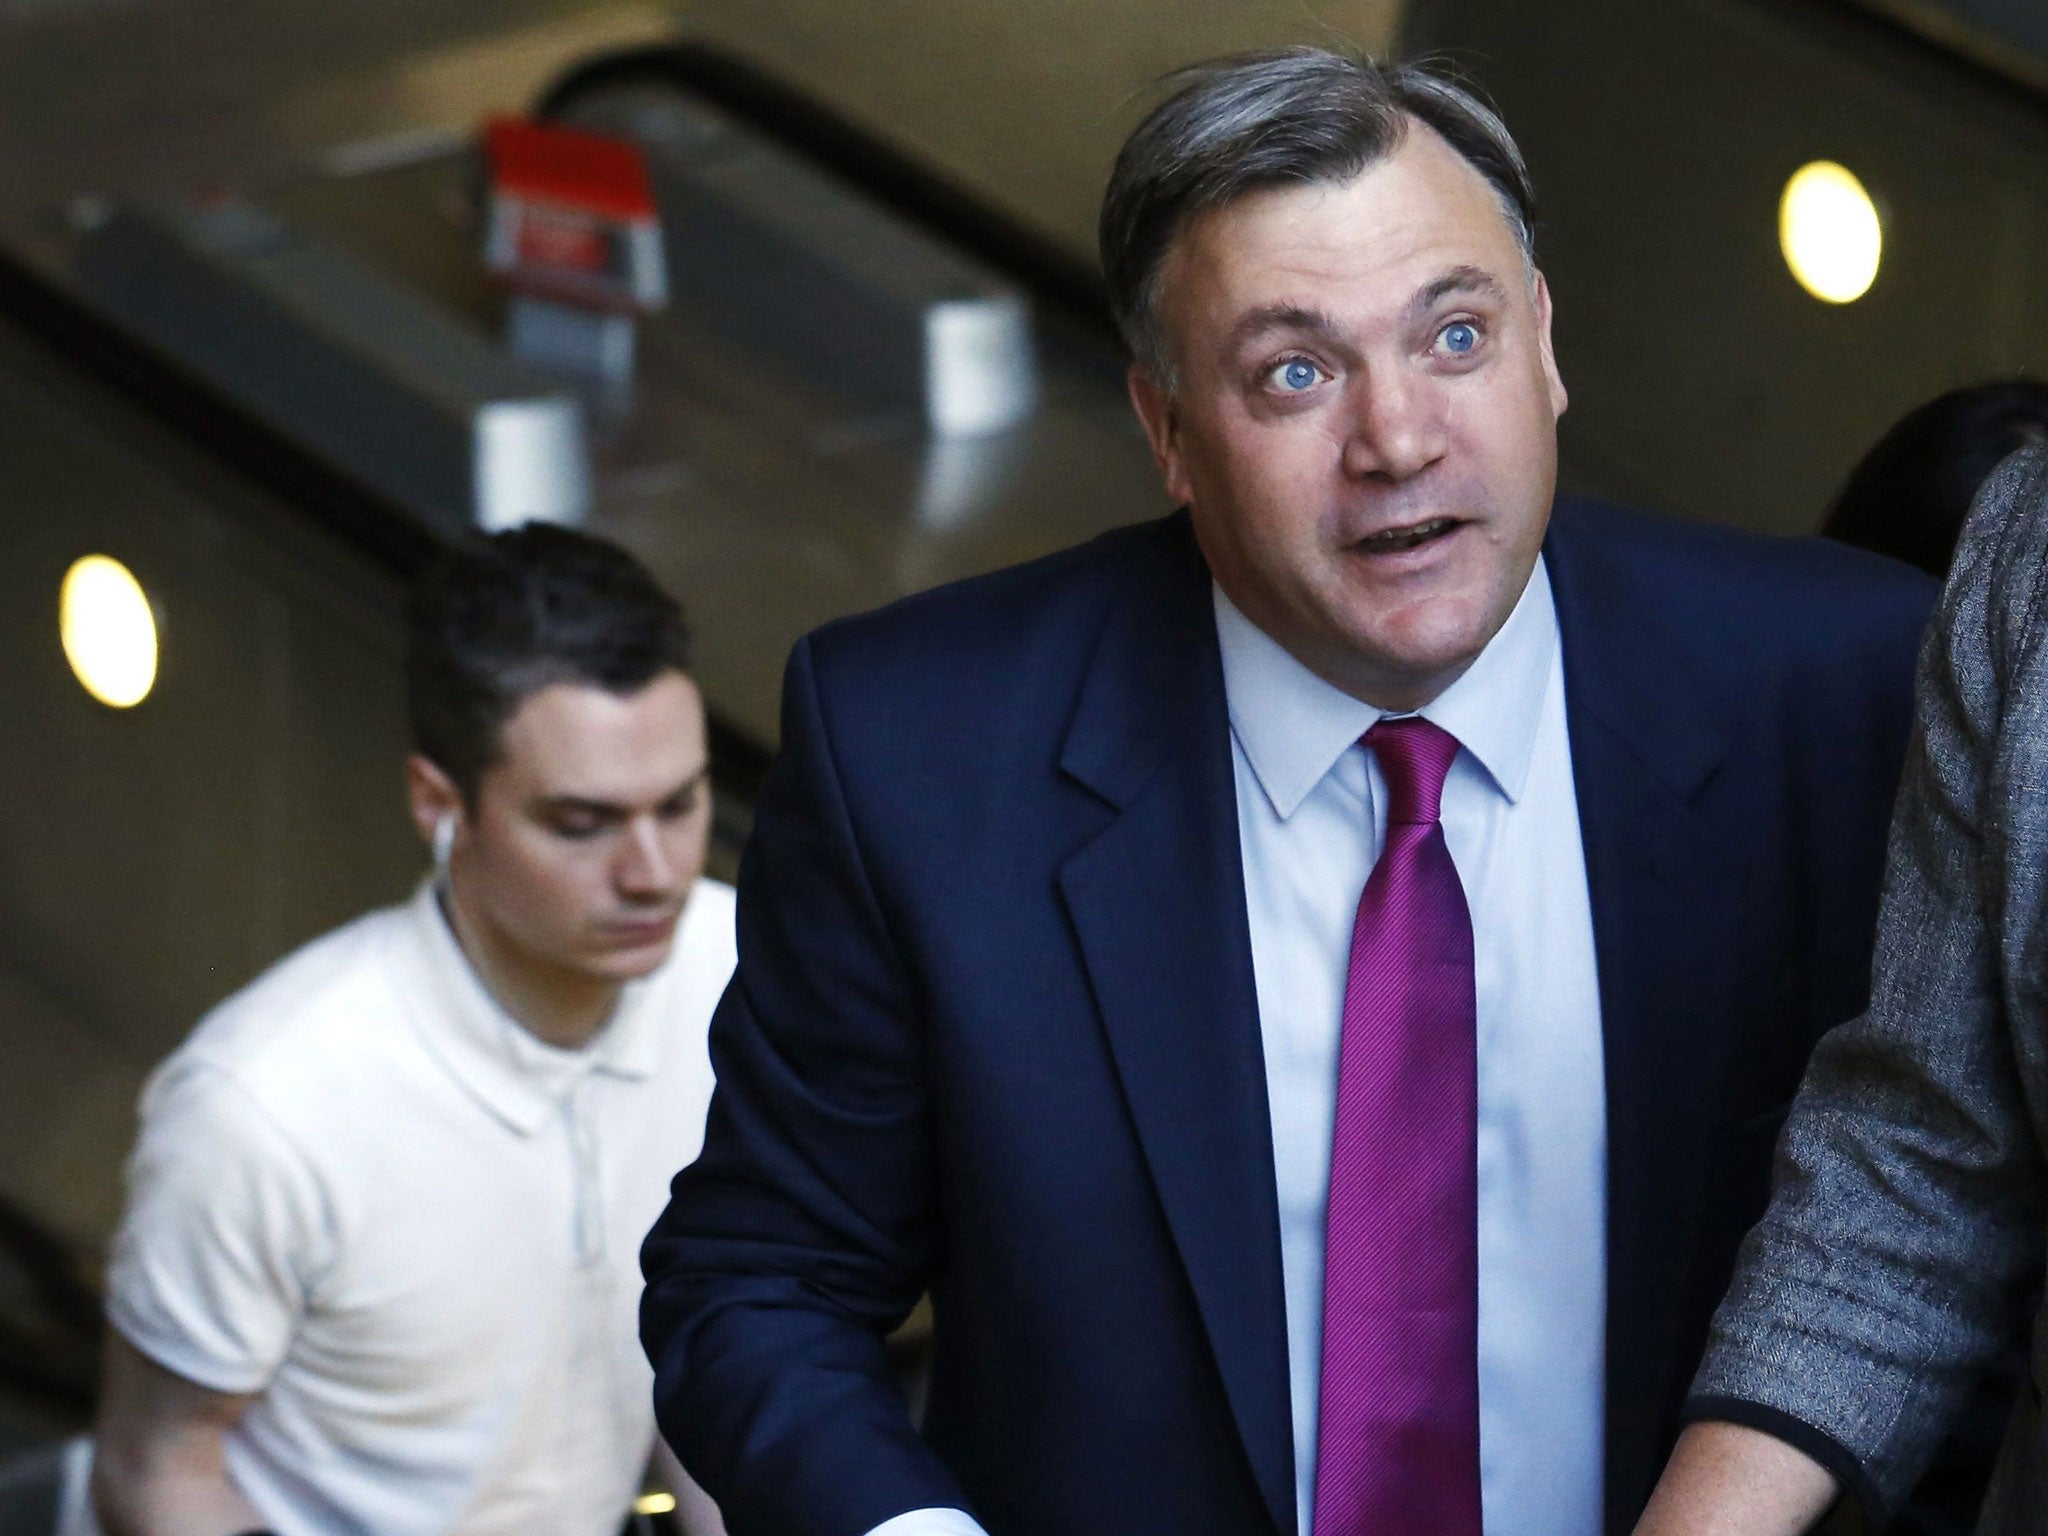 Ed Balls arrives at the Thomson Reuters headquarters to give his speech